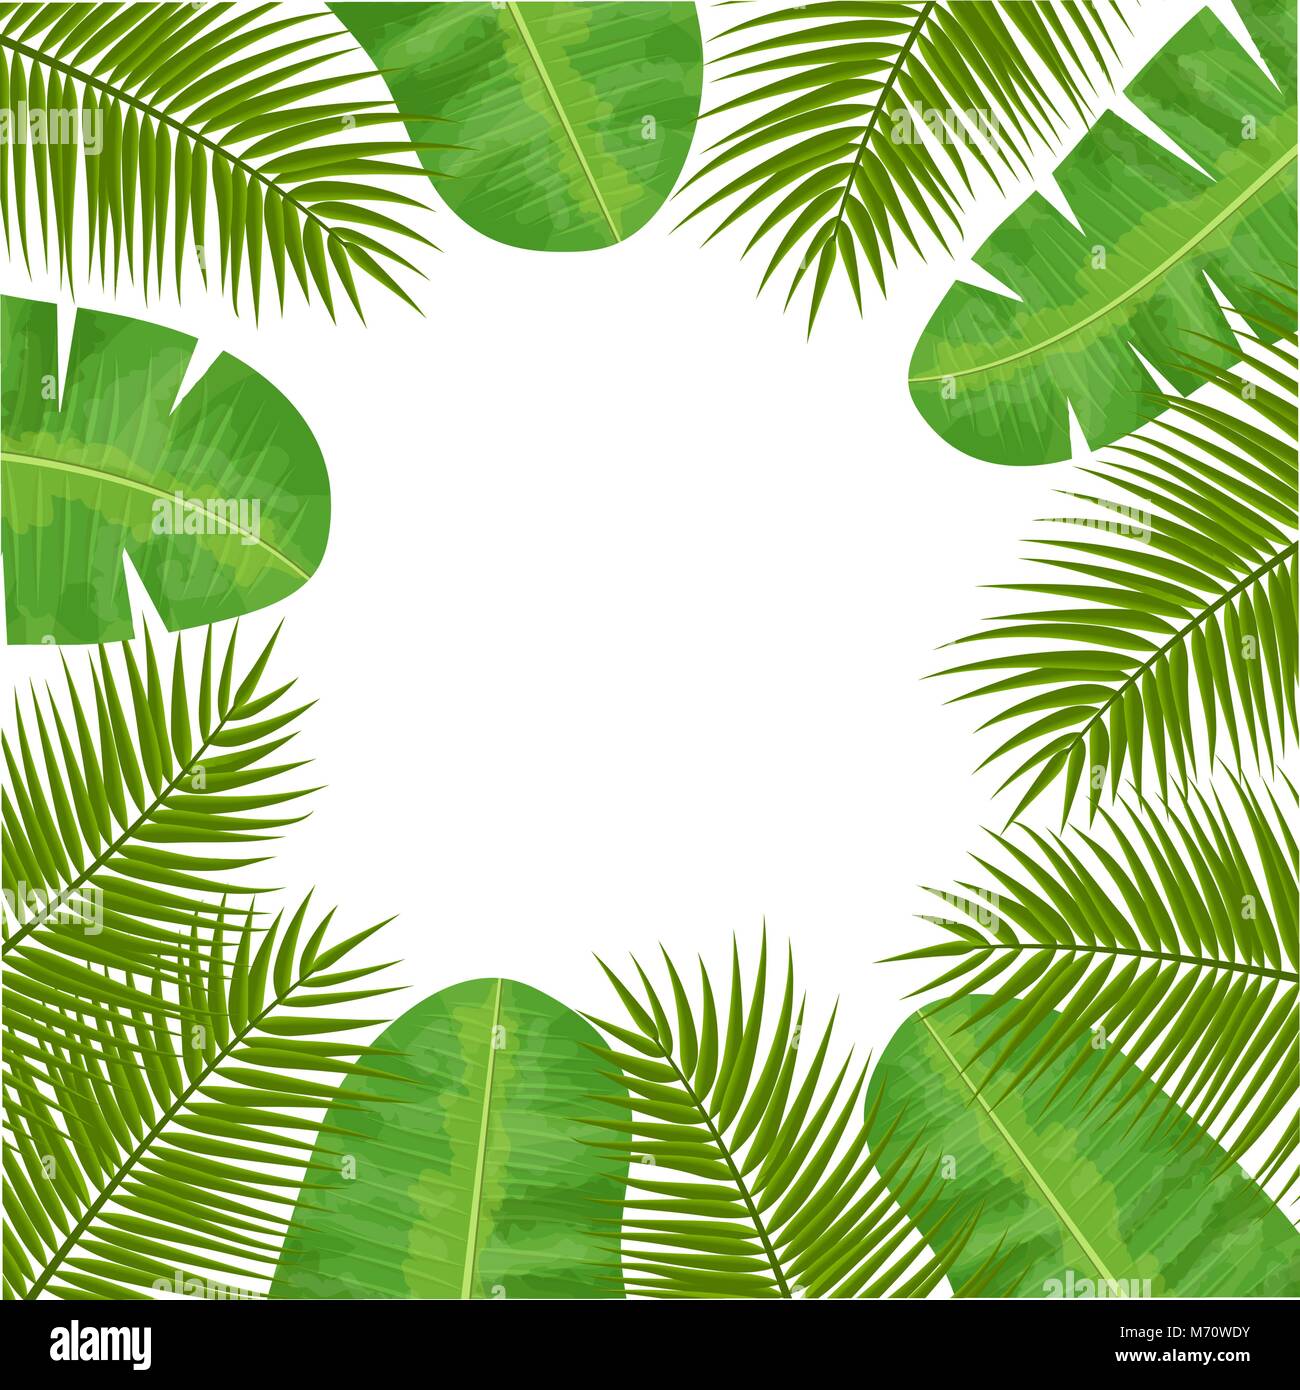 Coconut palm and Banana palm leaves frame. Central place for text. label template. Vector illustration with tropic motif Stock Vector